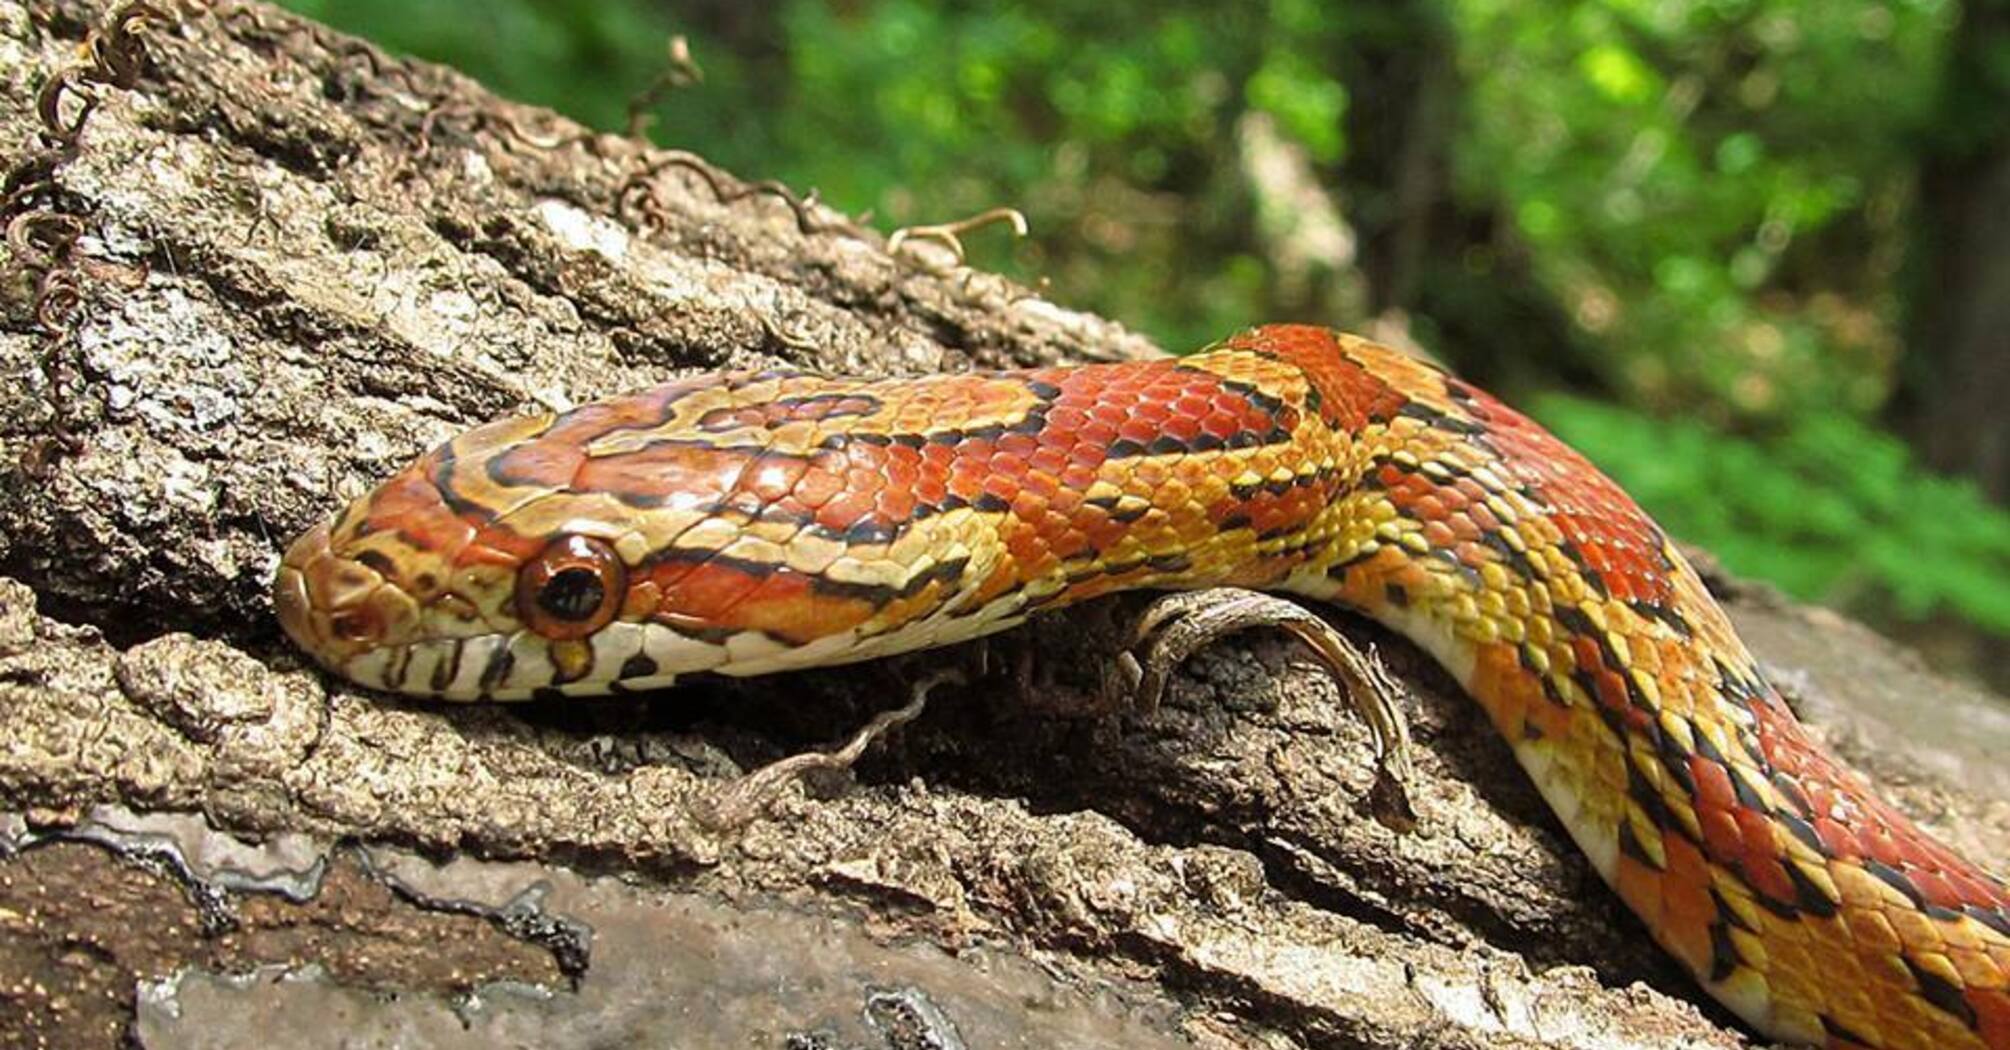 A strange discovery: Corn snake spotted in Ireland